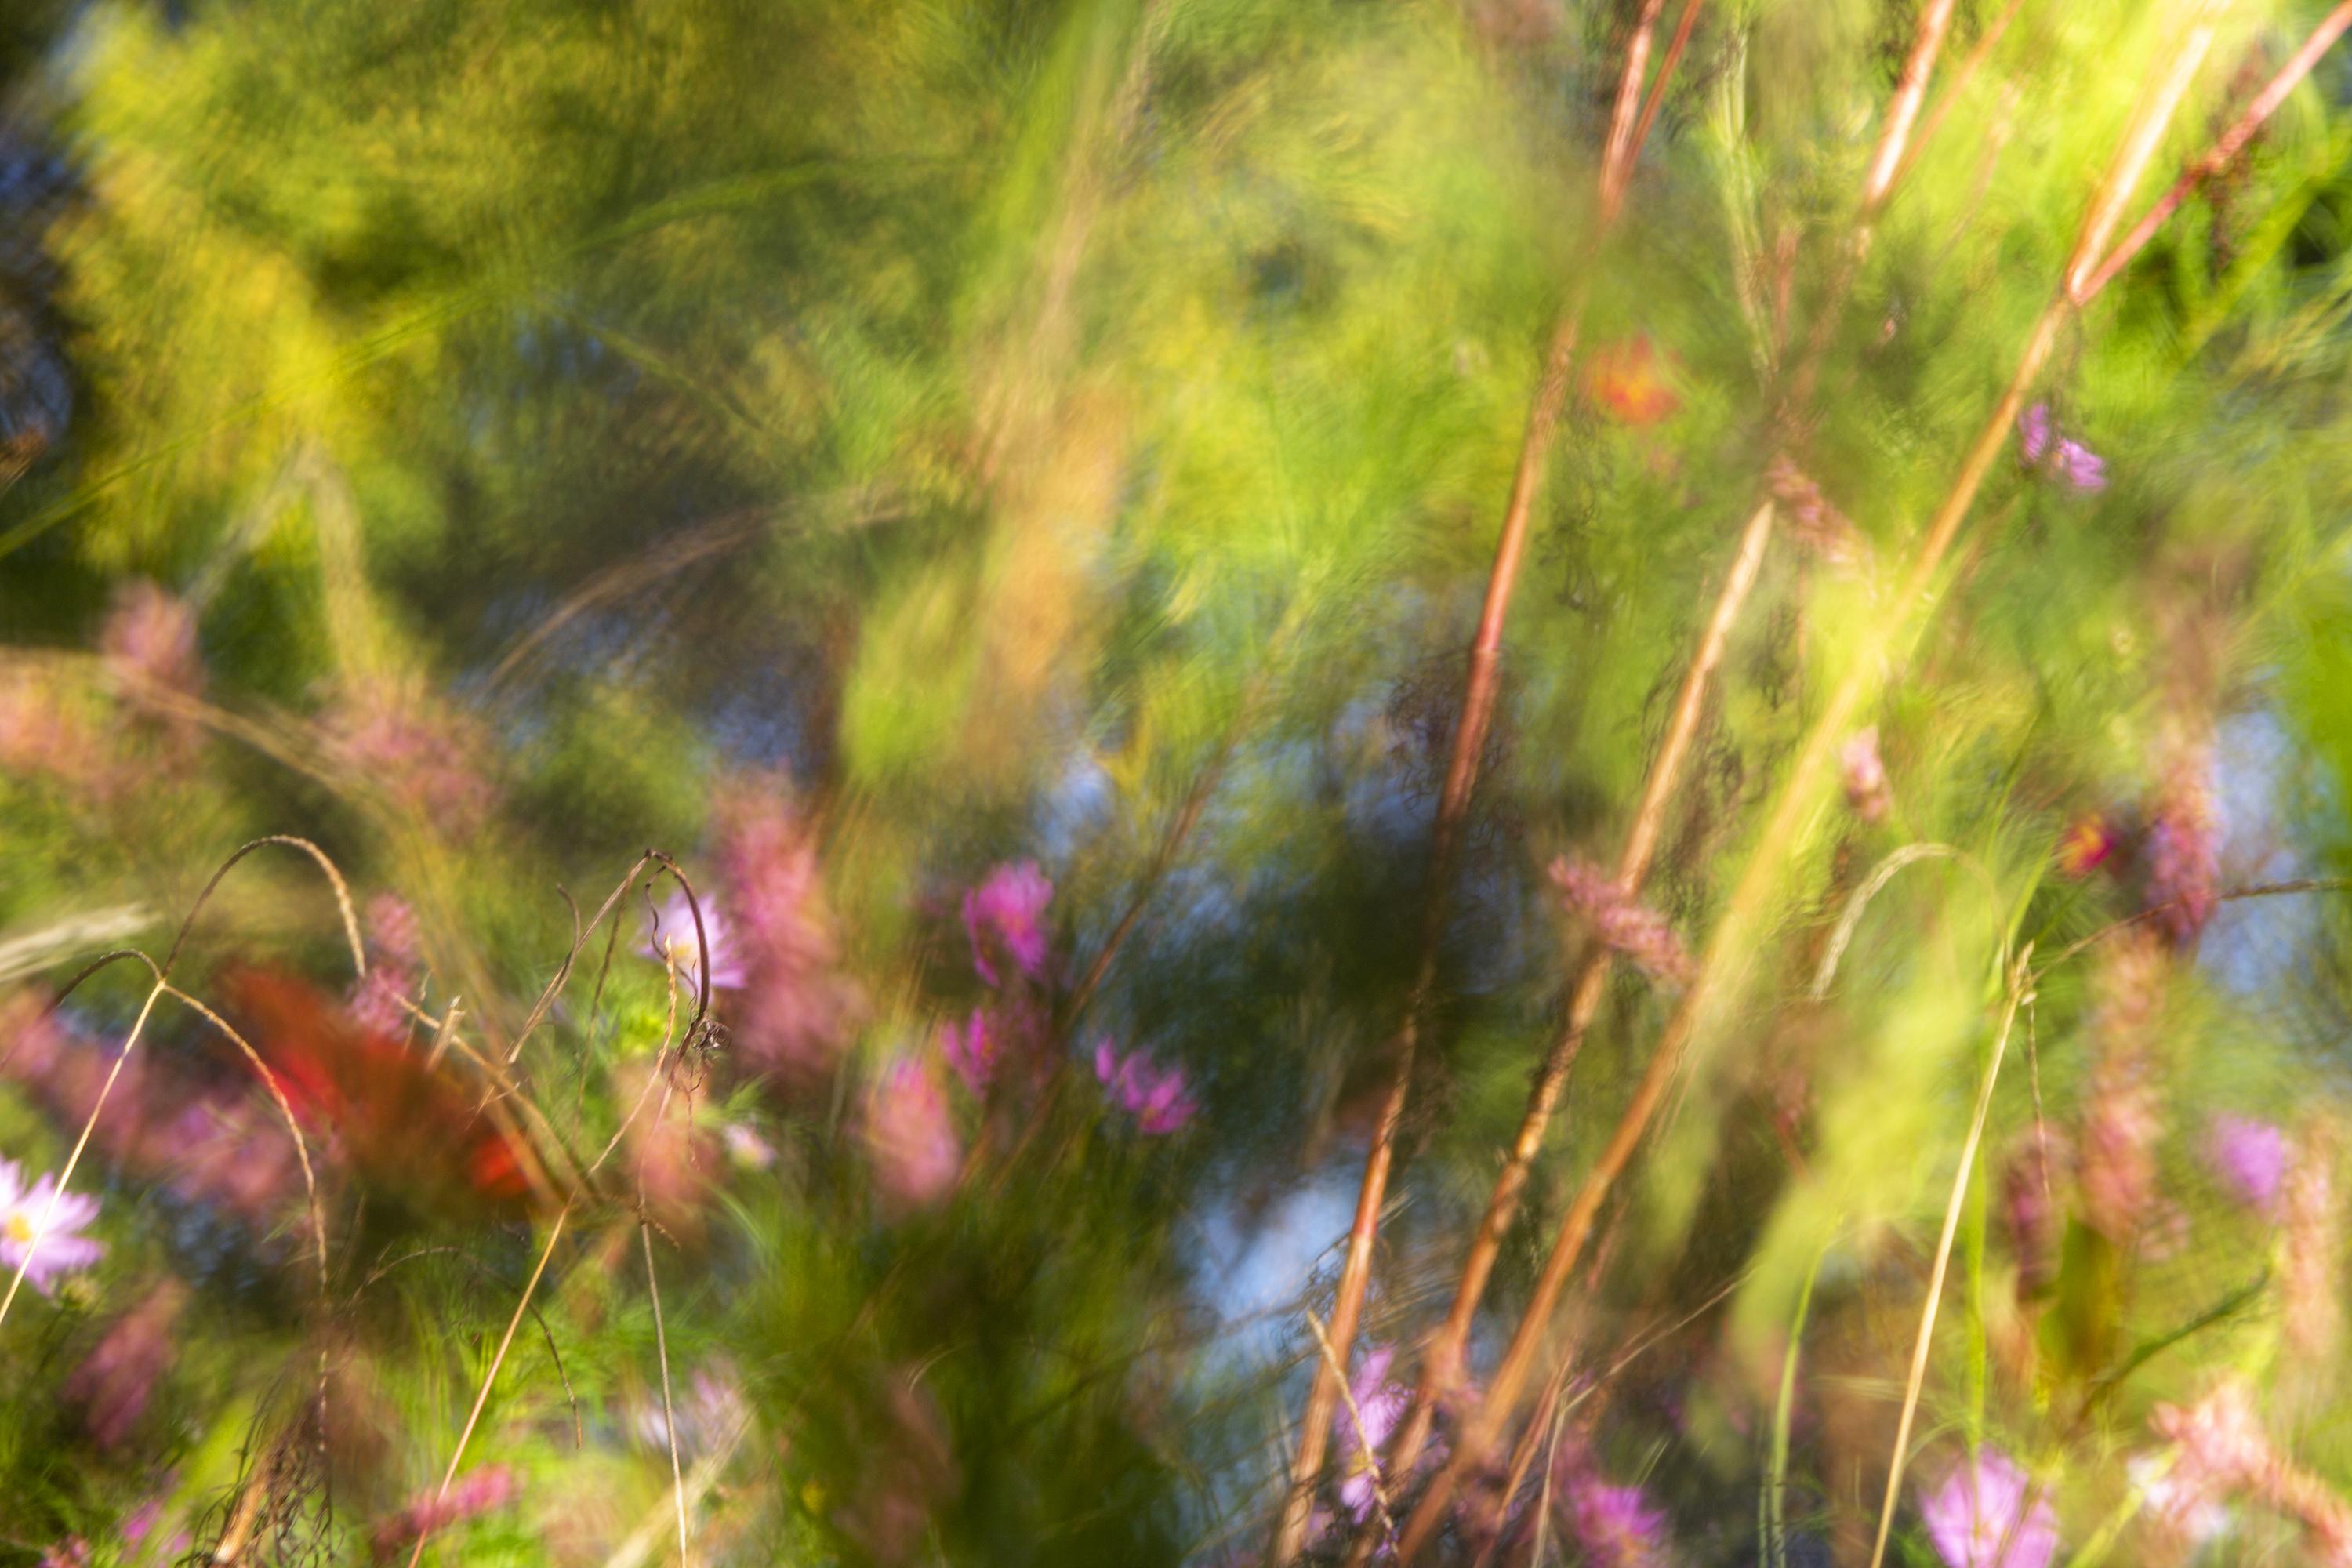 Thad Lee Landscape Photograph - 'October Color, Holly Springs' - abstract landscape photography - floral